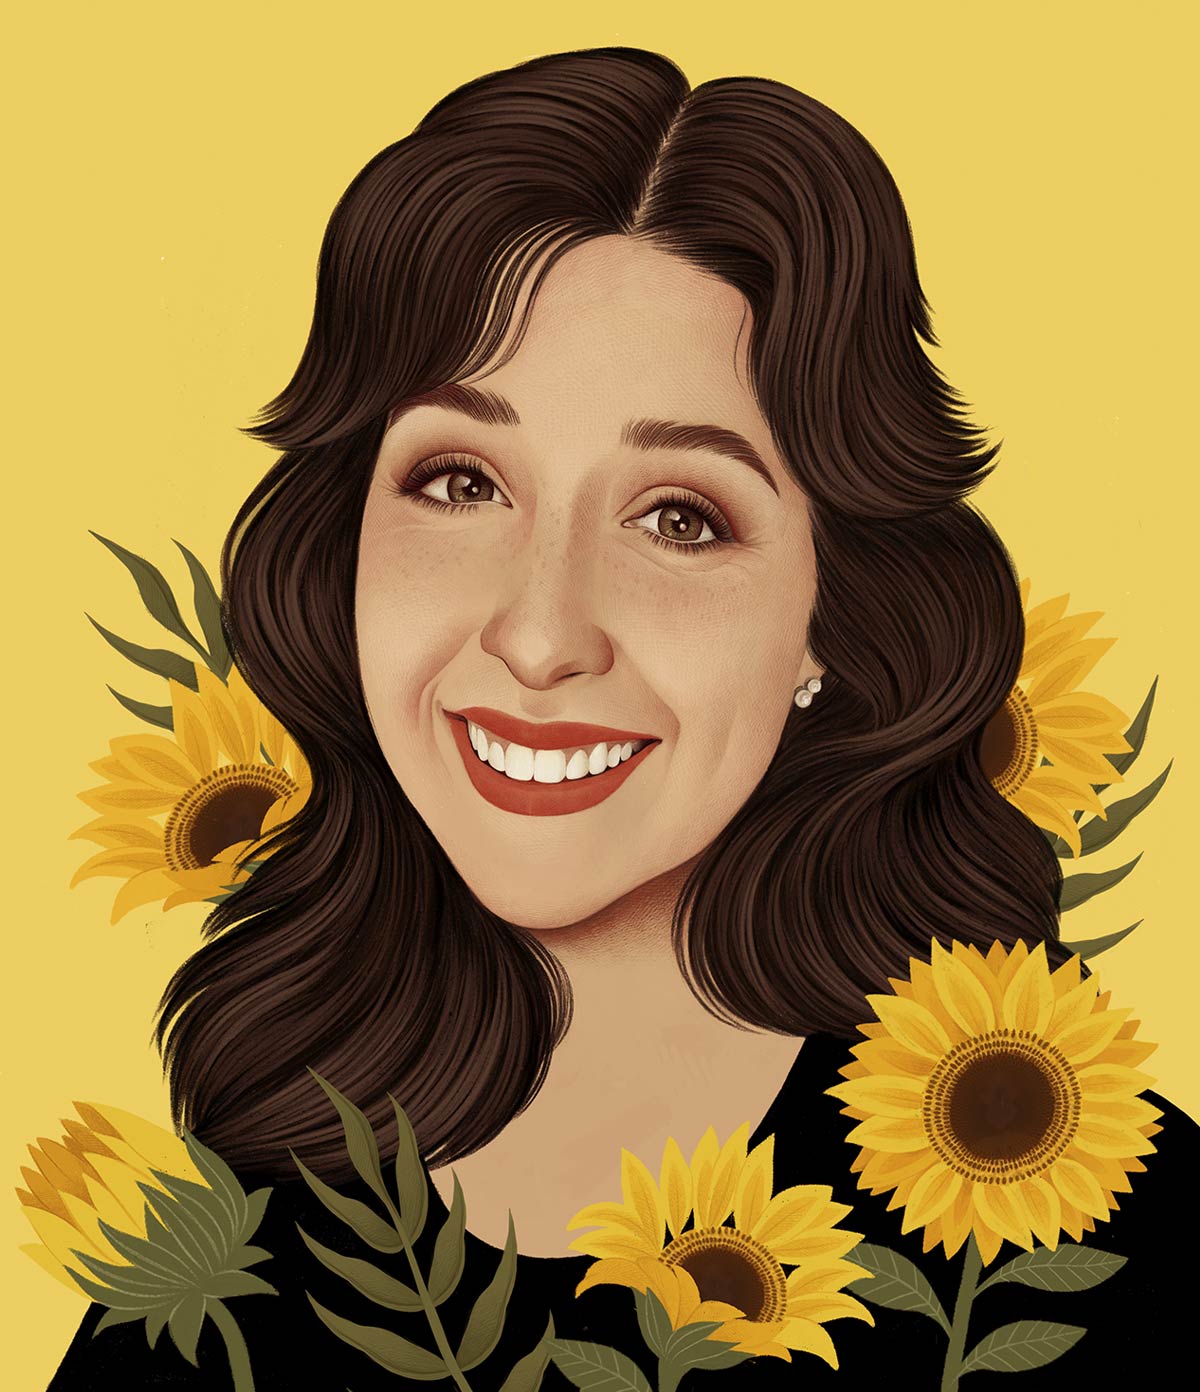 An illustration of Molly Beckman surrounded by sunflowers